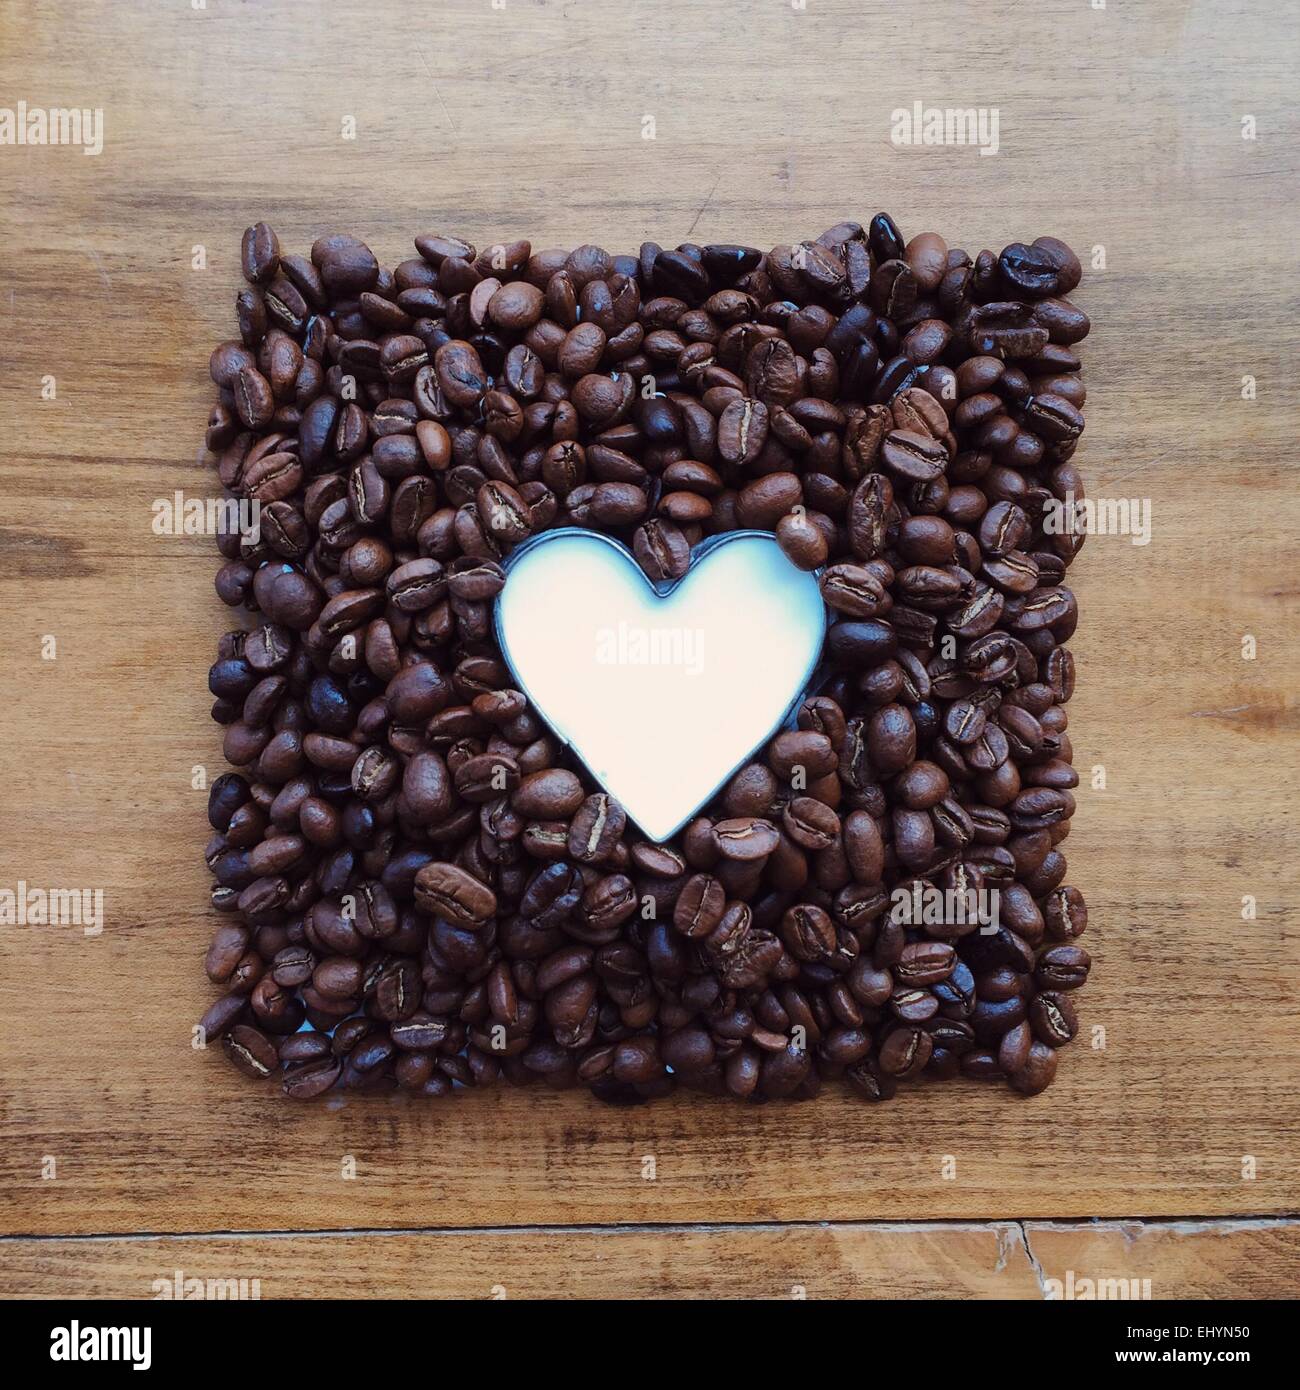 Coffee beans in shape of square, surrounding a heart shaped creamer Stock Photo